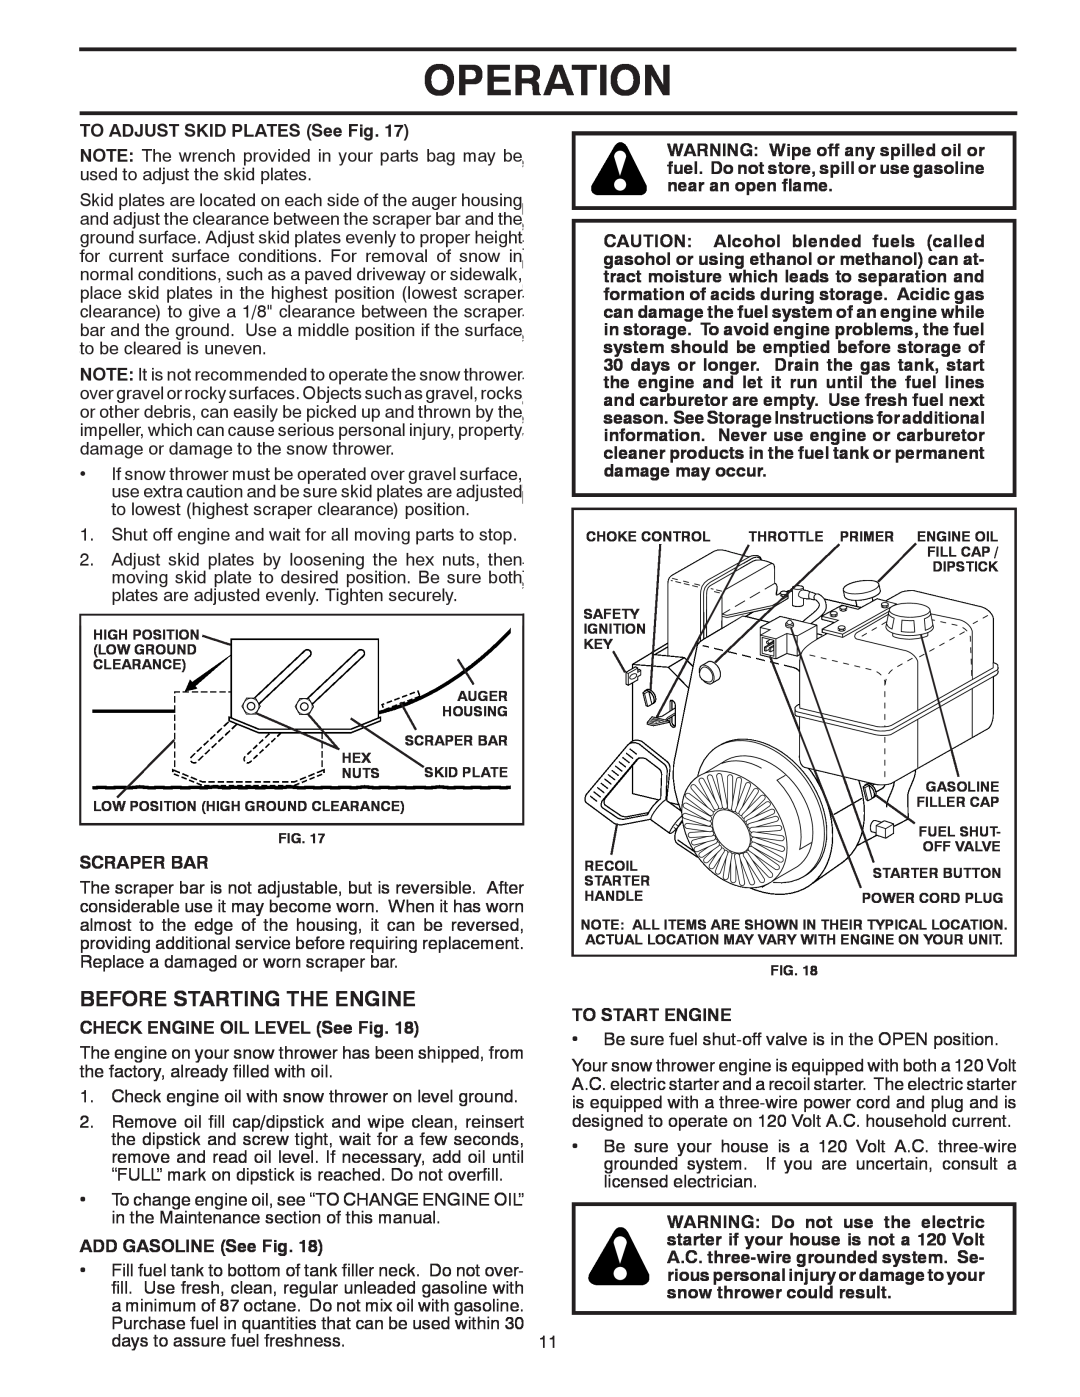 Poulan 414659 Operation, Before Starting The Engine, TO ADJUST SKID PLATES See Fig, Scraper Bar, ADD GASOLINE See Fig 